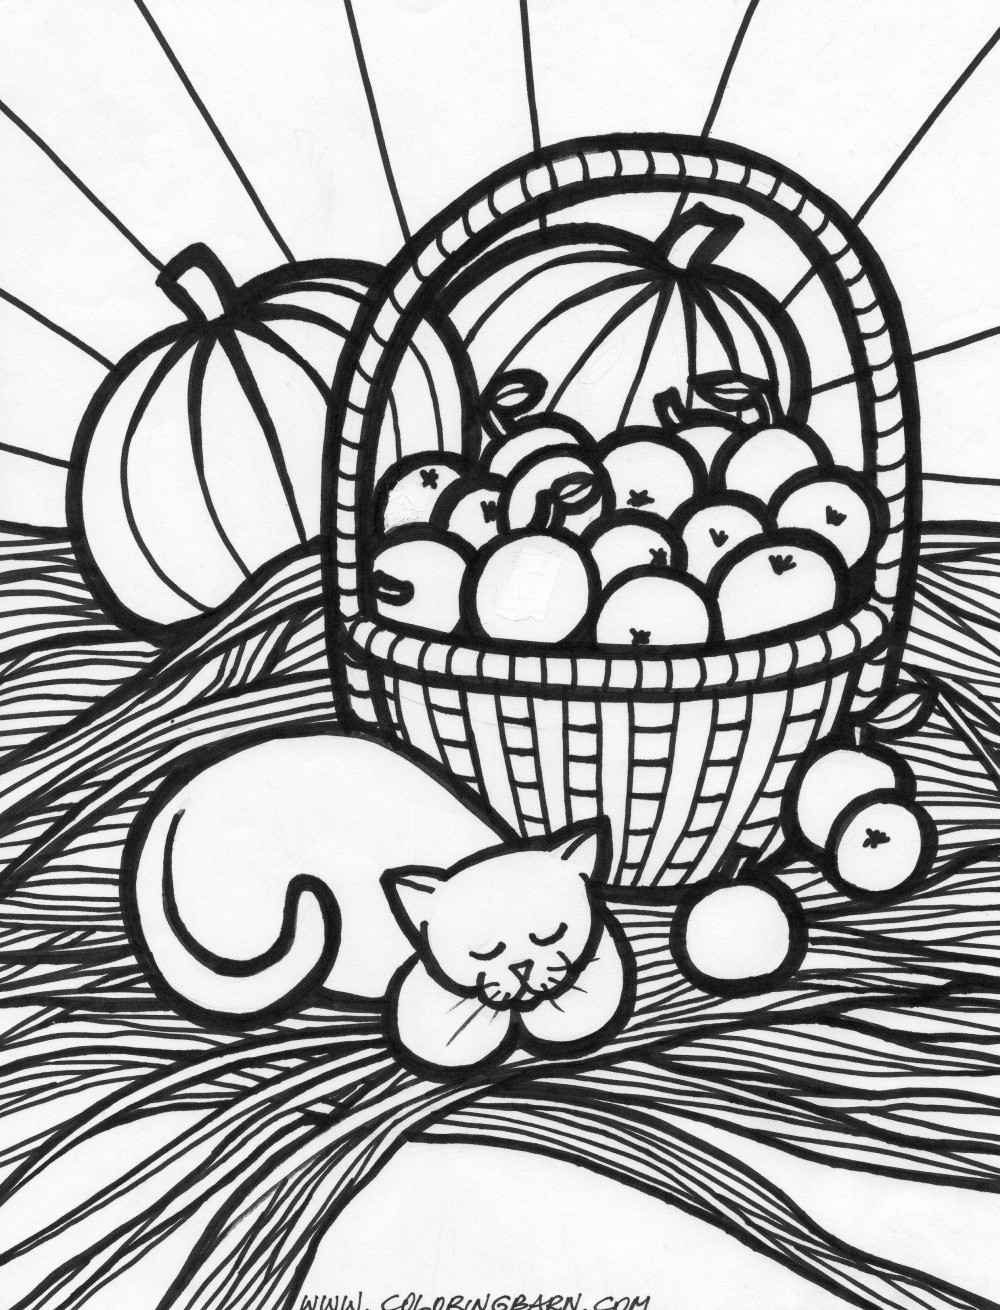 Autumn Coloring Pages | Fall Harvest Coloring Pages - Coloring Pages - Free Printable Fall Harvest Coloring Pages